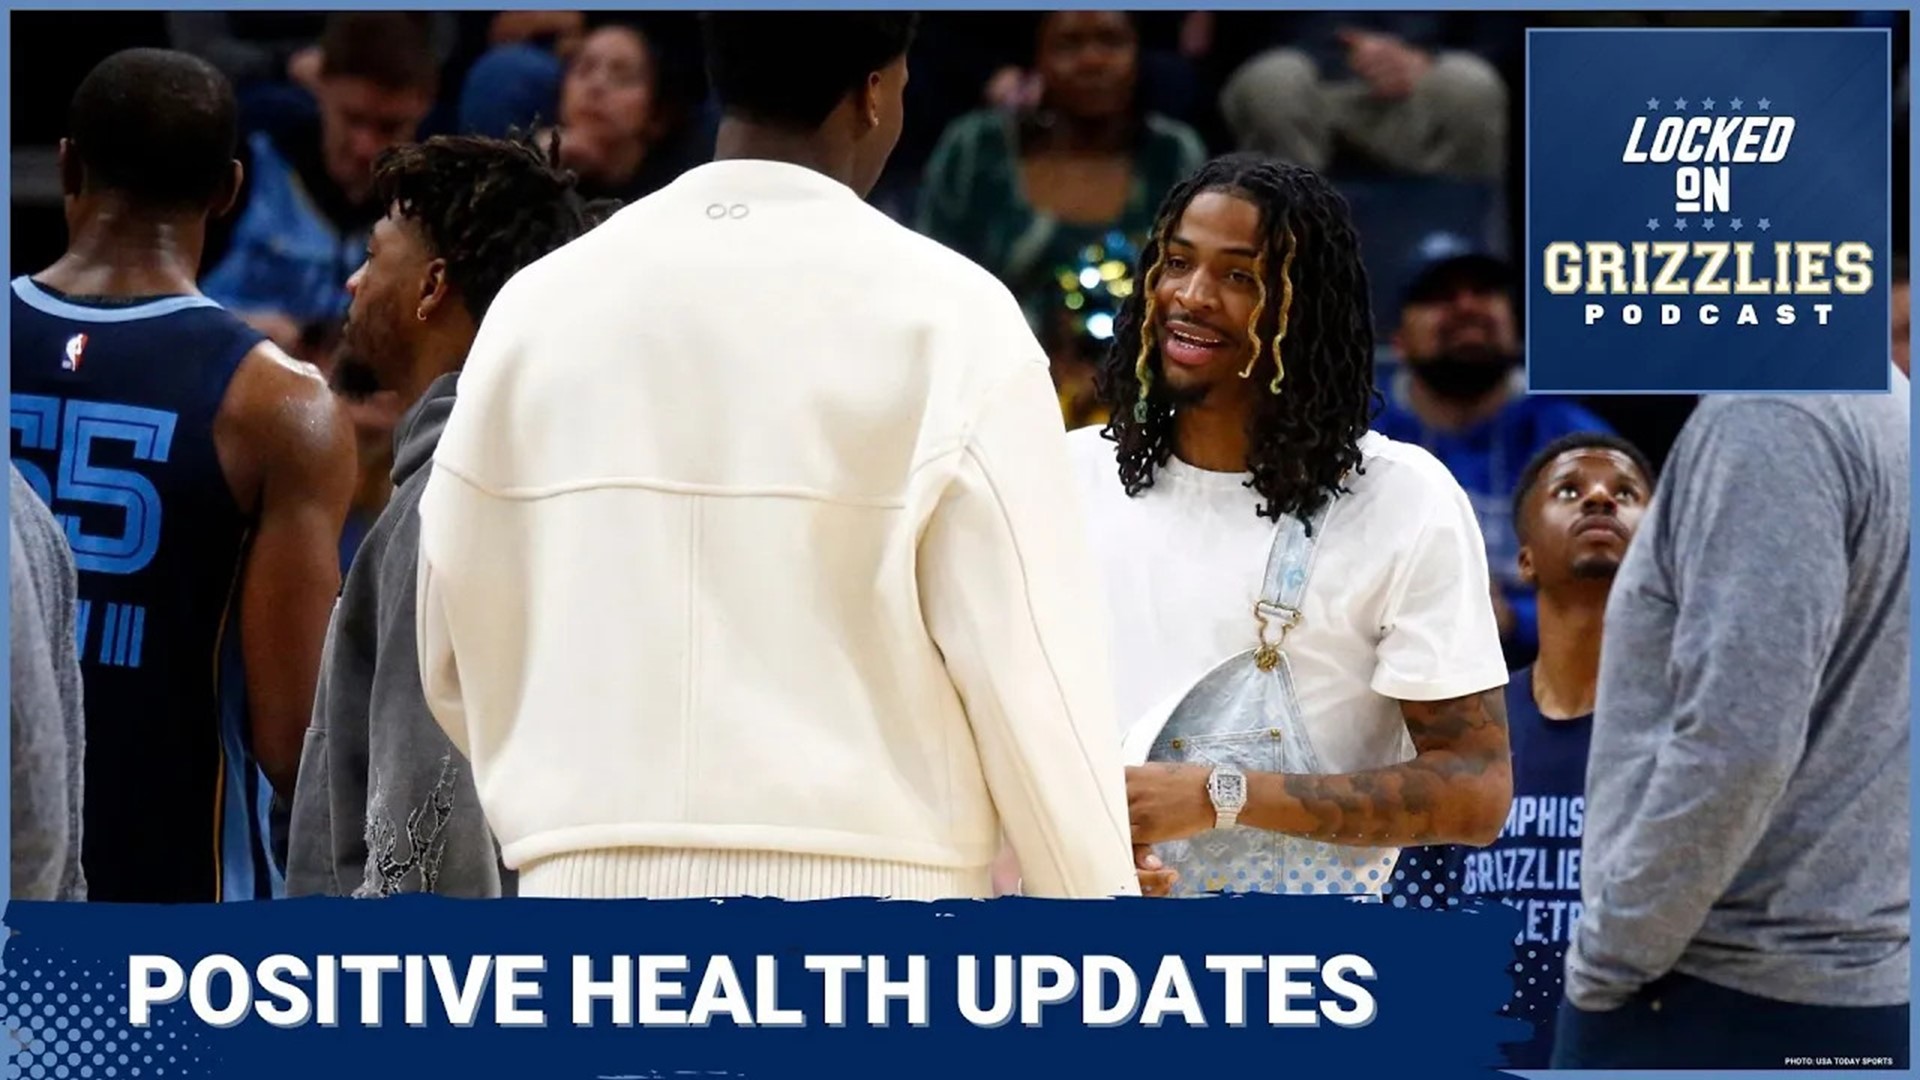 The Memphis Grizzlies are getting healthier. On this episode of Locked on Grizzlies, host Damichael Cole provides injury updates.